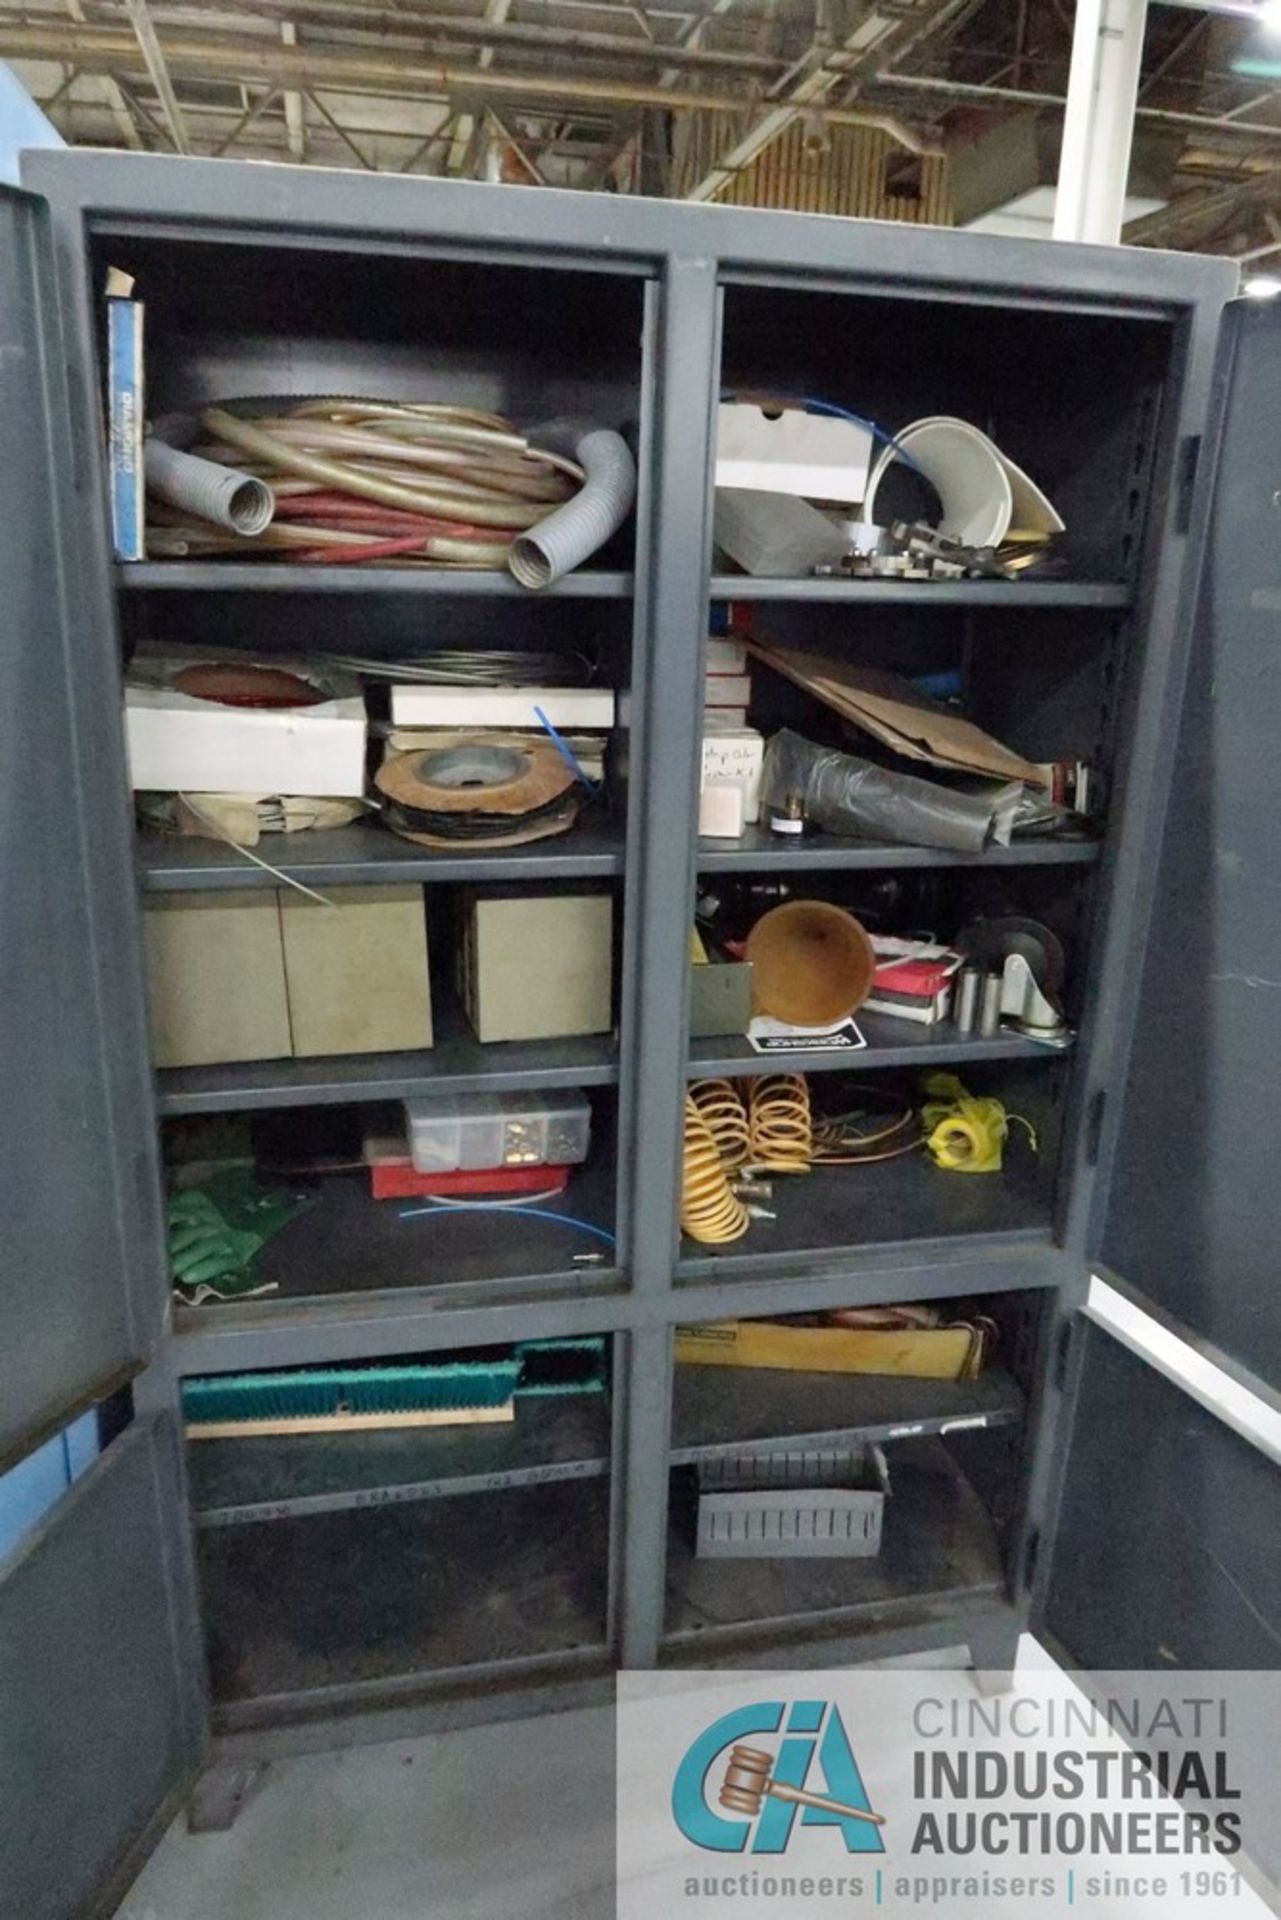 FOUR-DOOR COMPARTMENT STRONGHOLD TYPE HEAVY DUTY STORAGE CABINET AND CONTENTS WITH MISCELLANEOUS HOP - Image 2 of 4